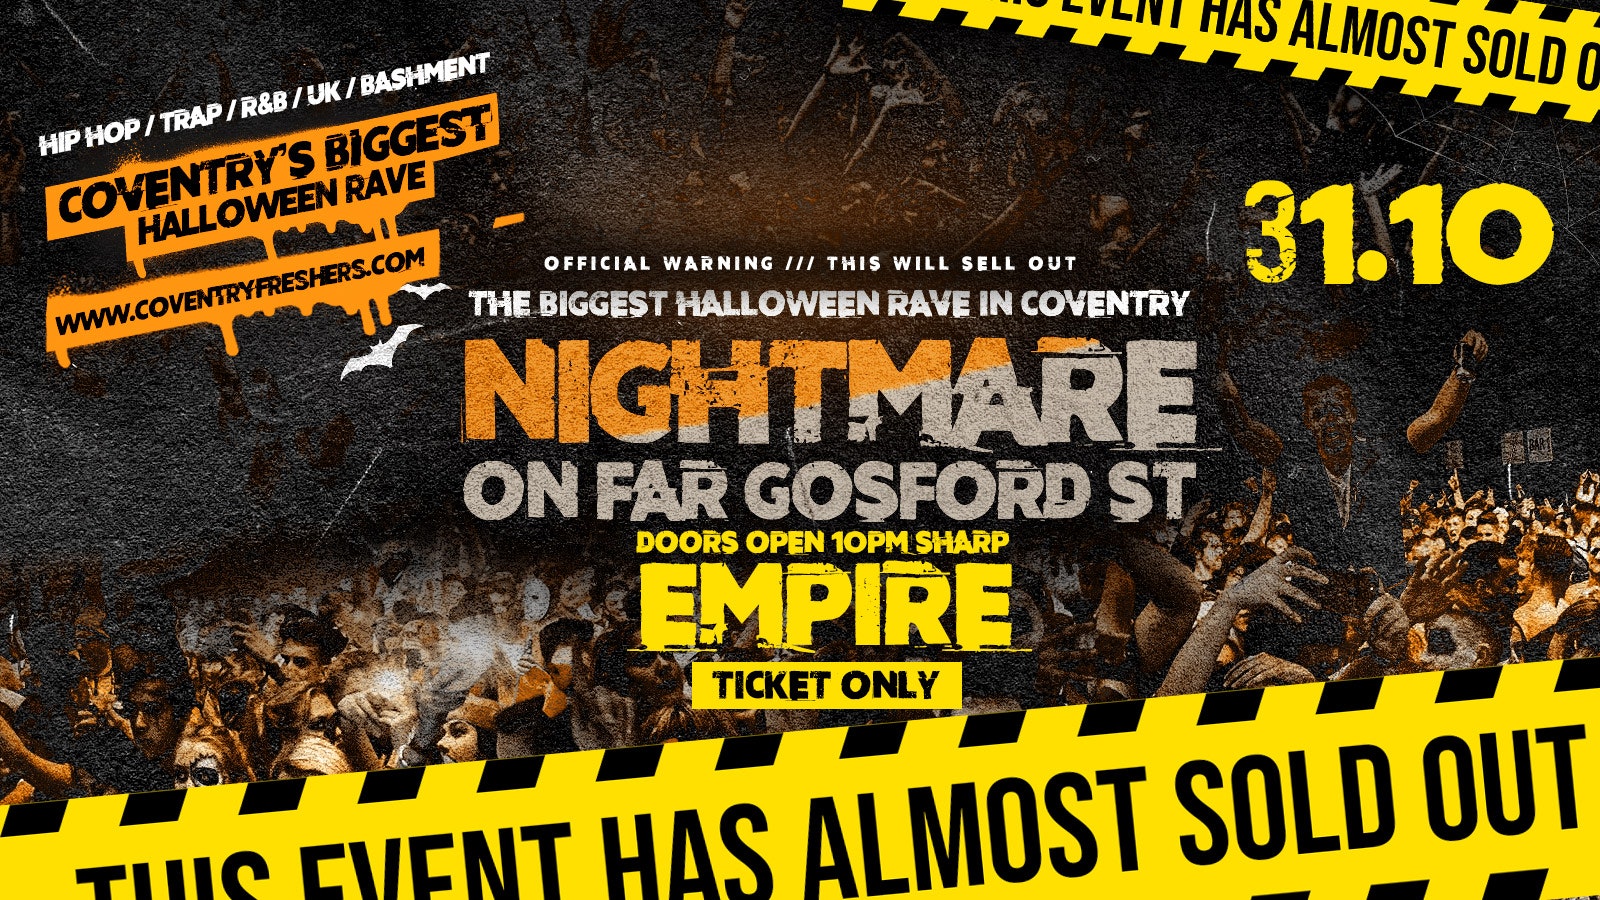 Nightmare on Far Gosford St at Empire – Coventry’s Biggest Halloween Rave 2019